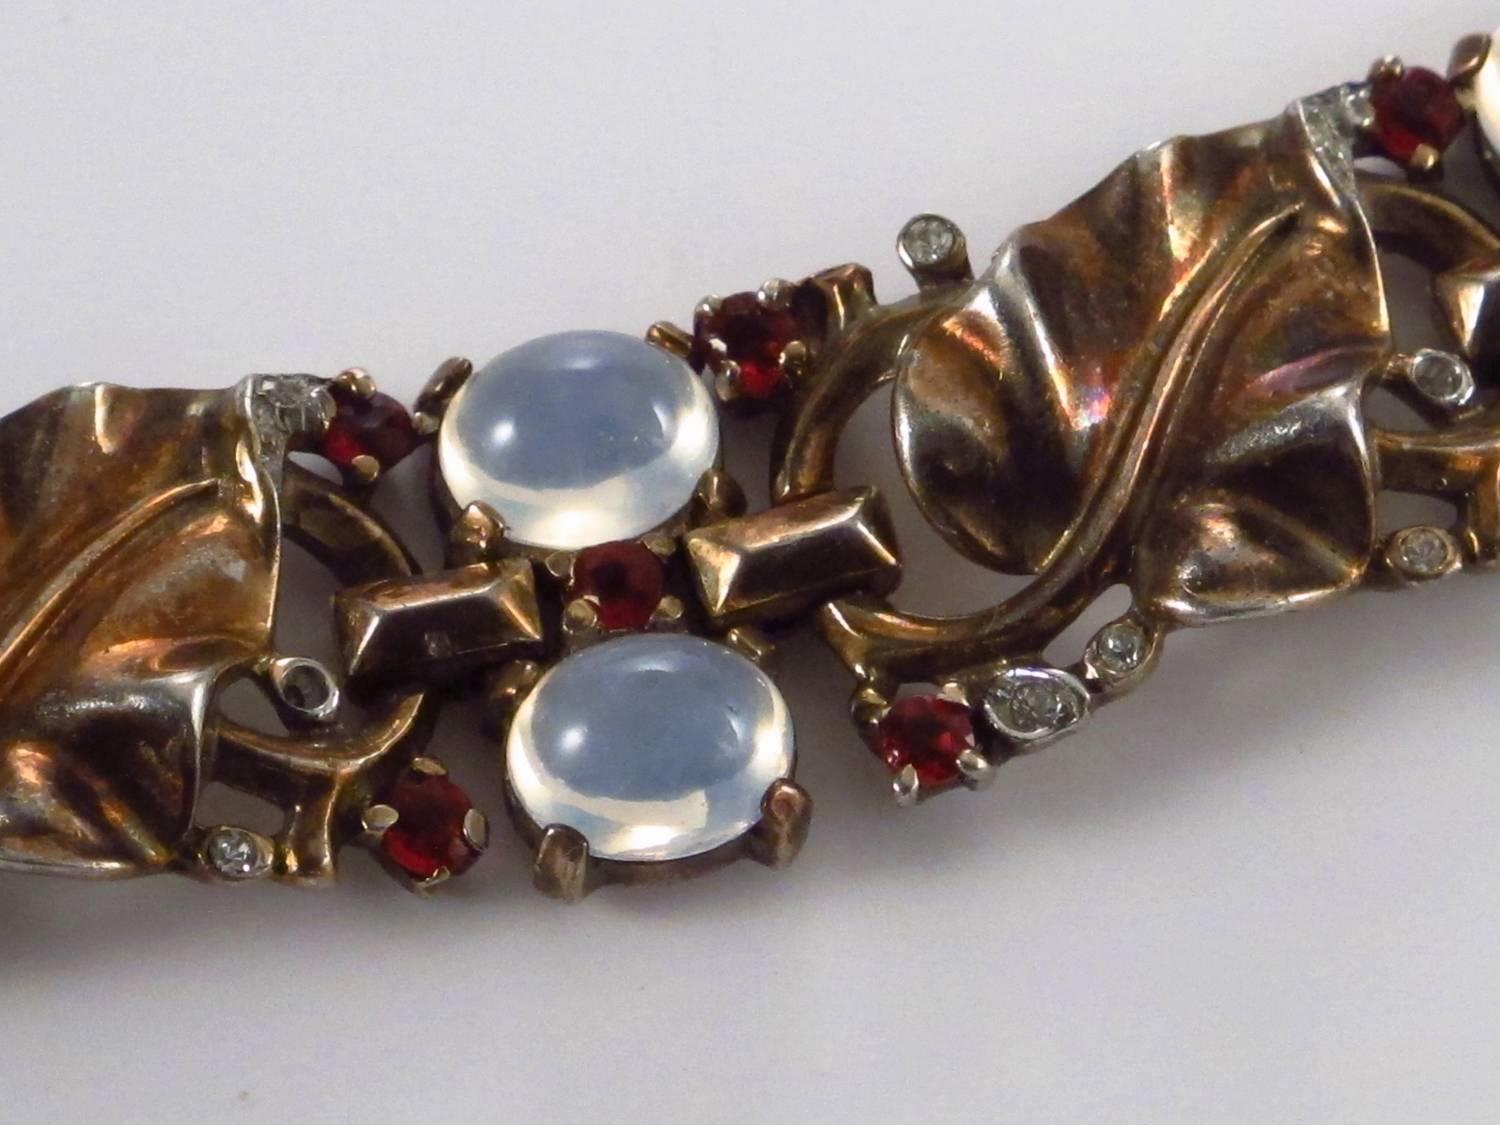 Trifari vintage bracelet moonstones on vermeil gold gilt sterling silver, Alfred Philippe, circa 1940s, USA. The pattern two moonstones cabochons surrounded by smaller red and clear rhinestones on a grapevine motif bracelet. Incorporates ten large,